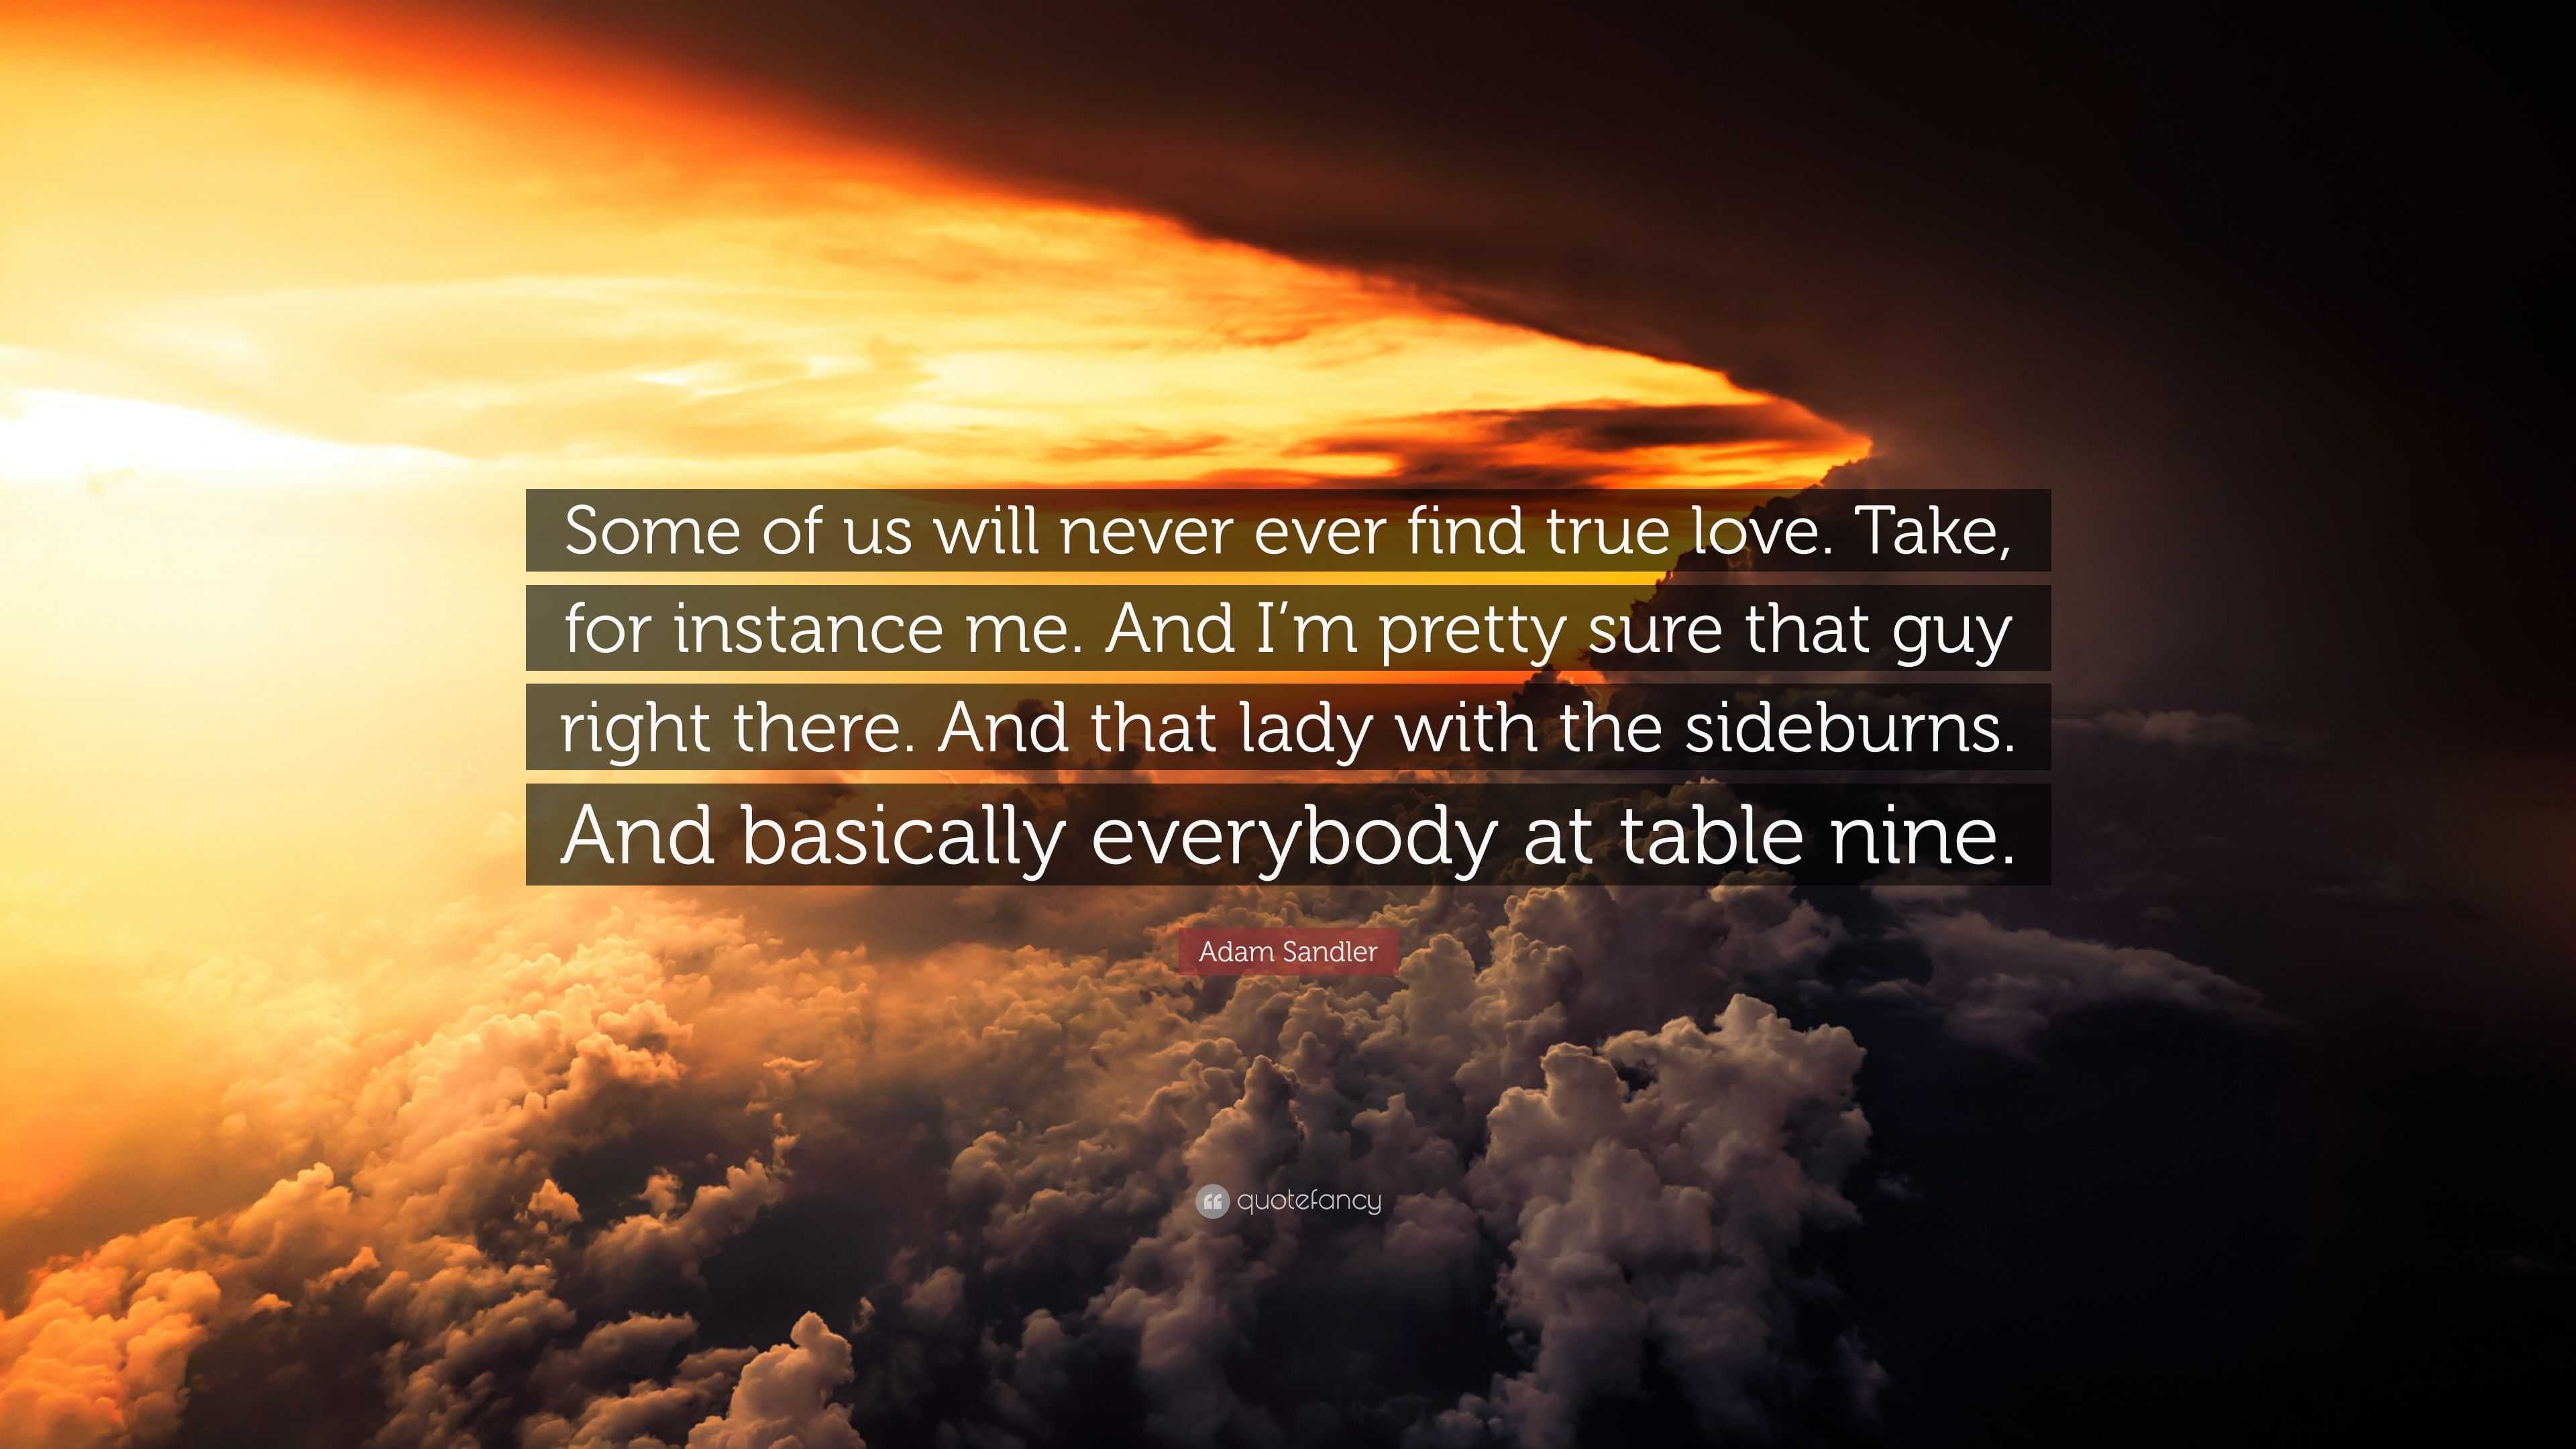 Adam Sandler Quote “Some of us will never ever find true love. Take